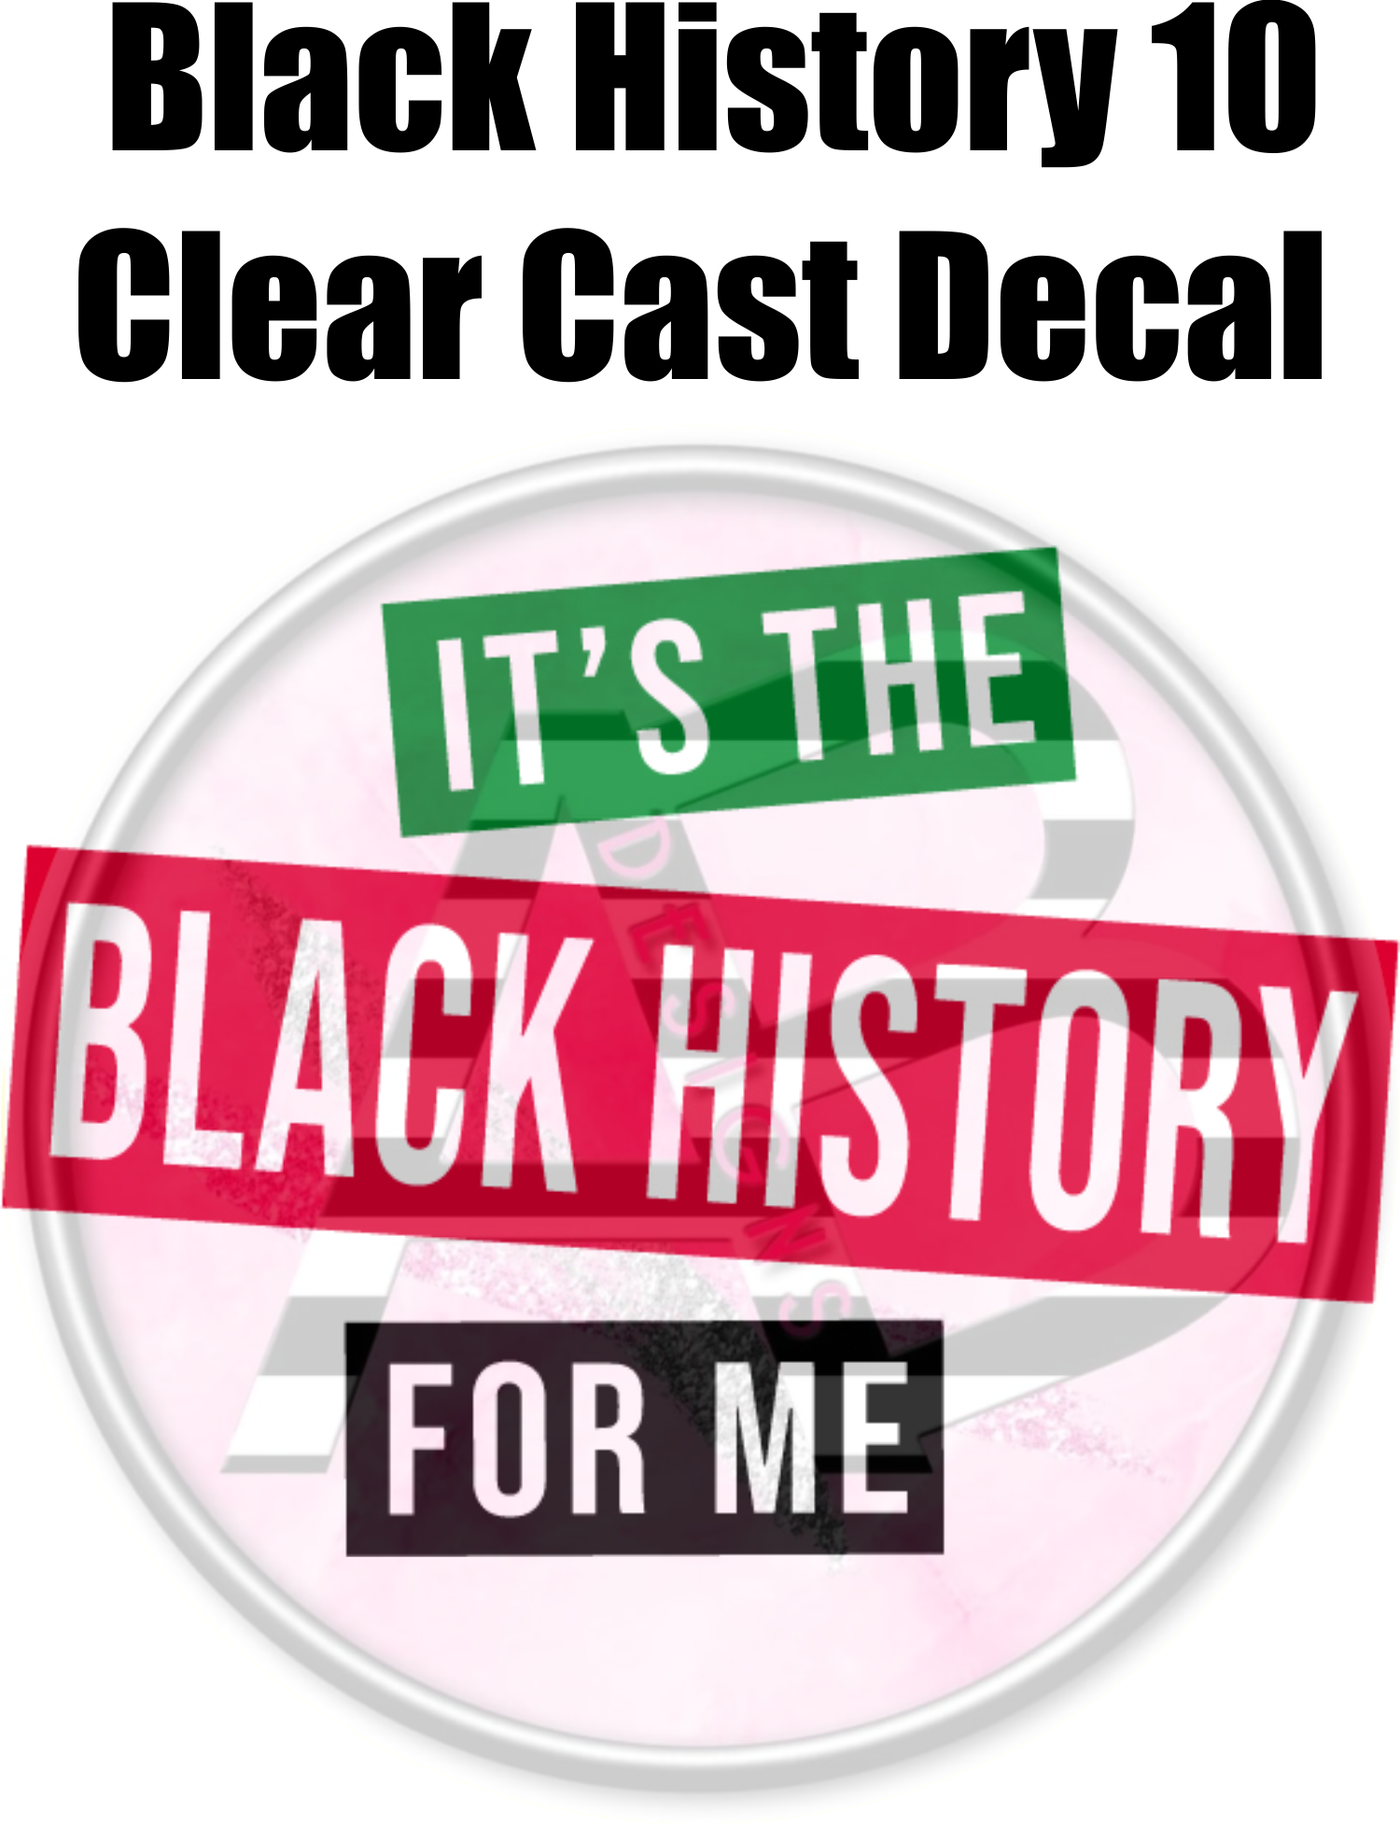 Black History 10 - Clear Cast Decal